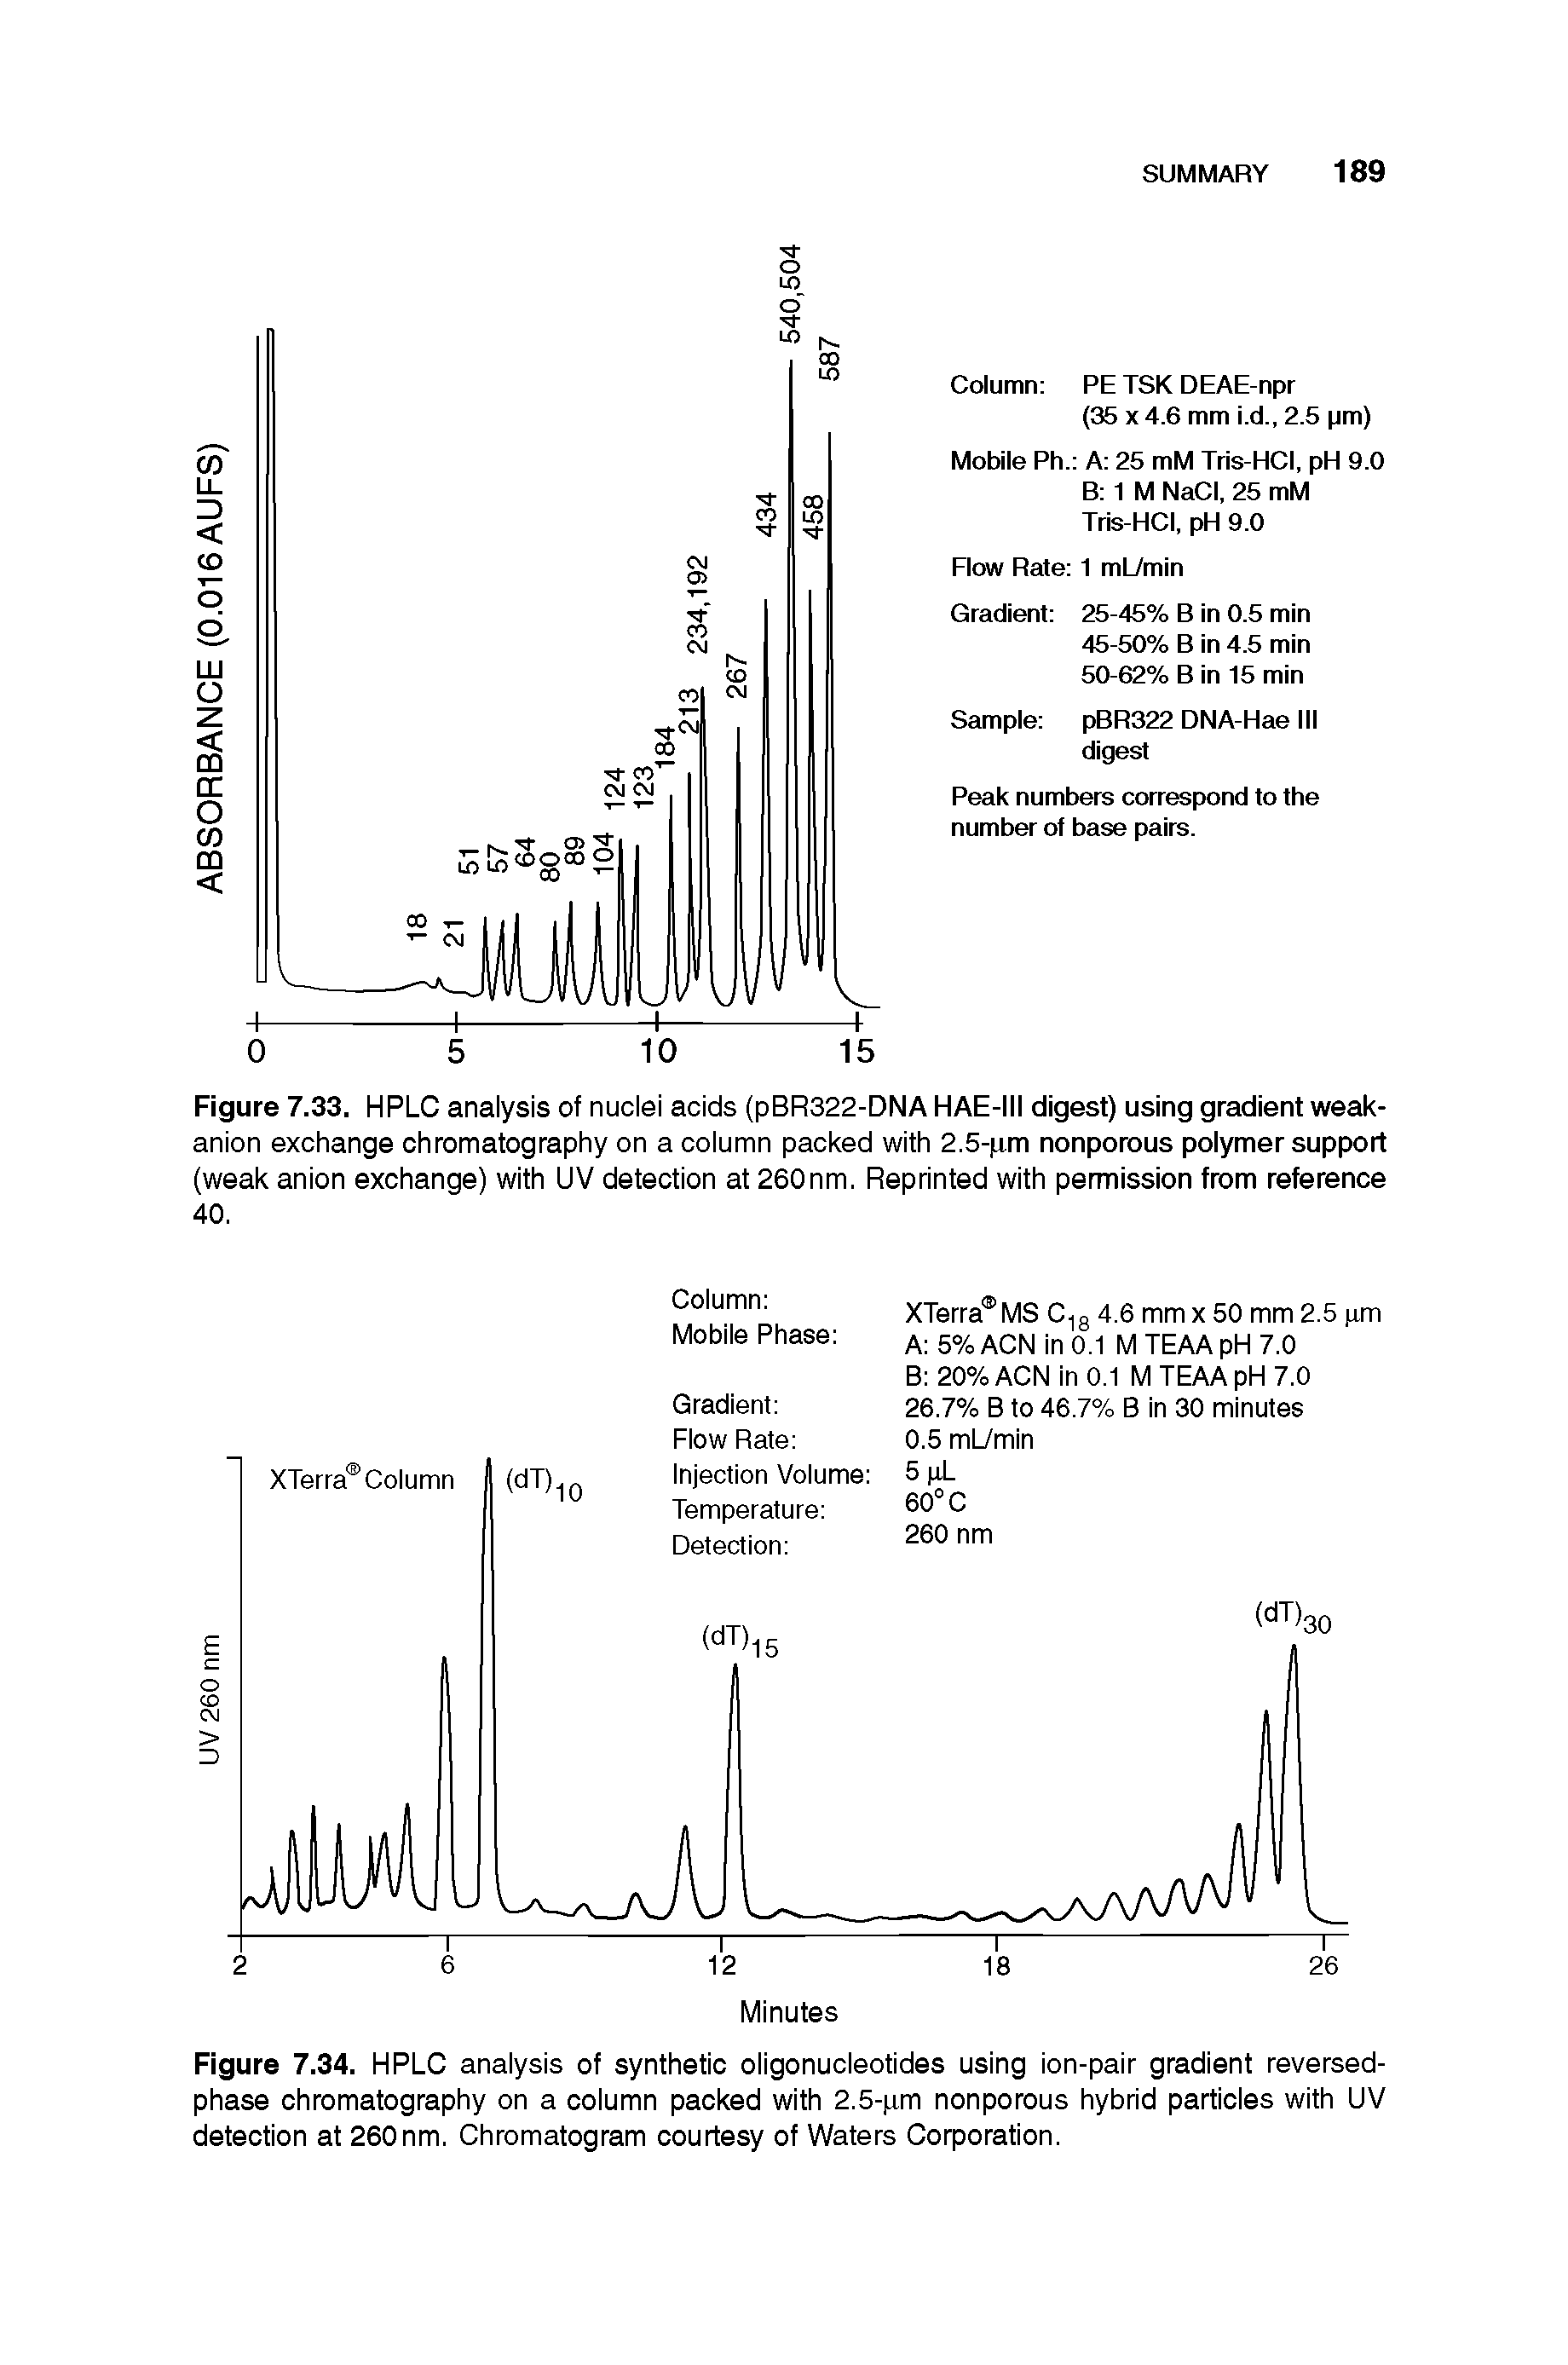 Figure 7.33. HPLC analysis of nuclei acids (pBR322-DNA HAE-III digest) using gradient weak-anion exchange chromatography on a column packed with 2.5-pm nonporous polymer support (weak anion exchange) with UV detection at 260nm. Reprinted with permission from reference 40.